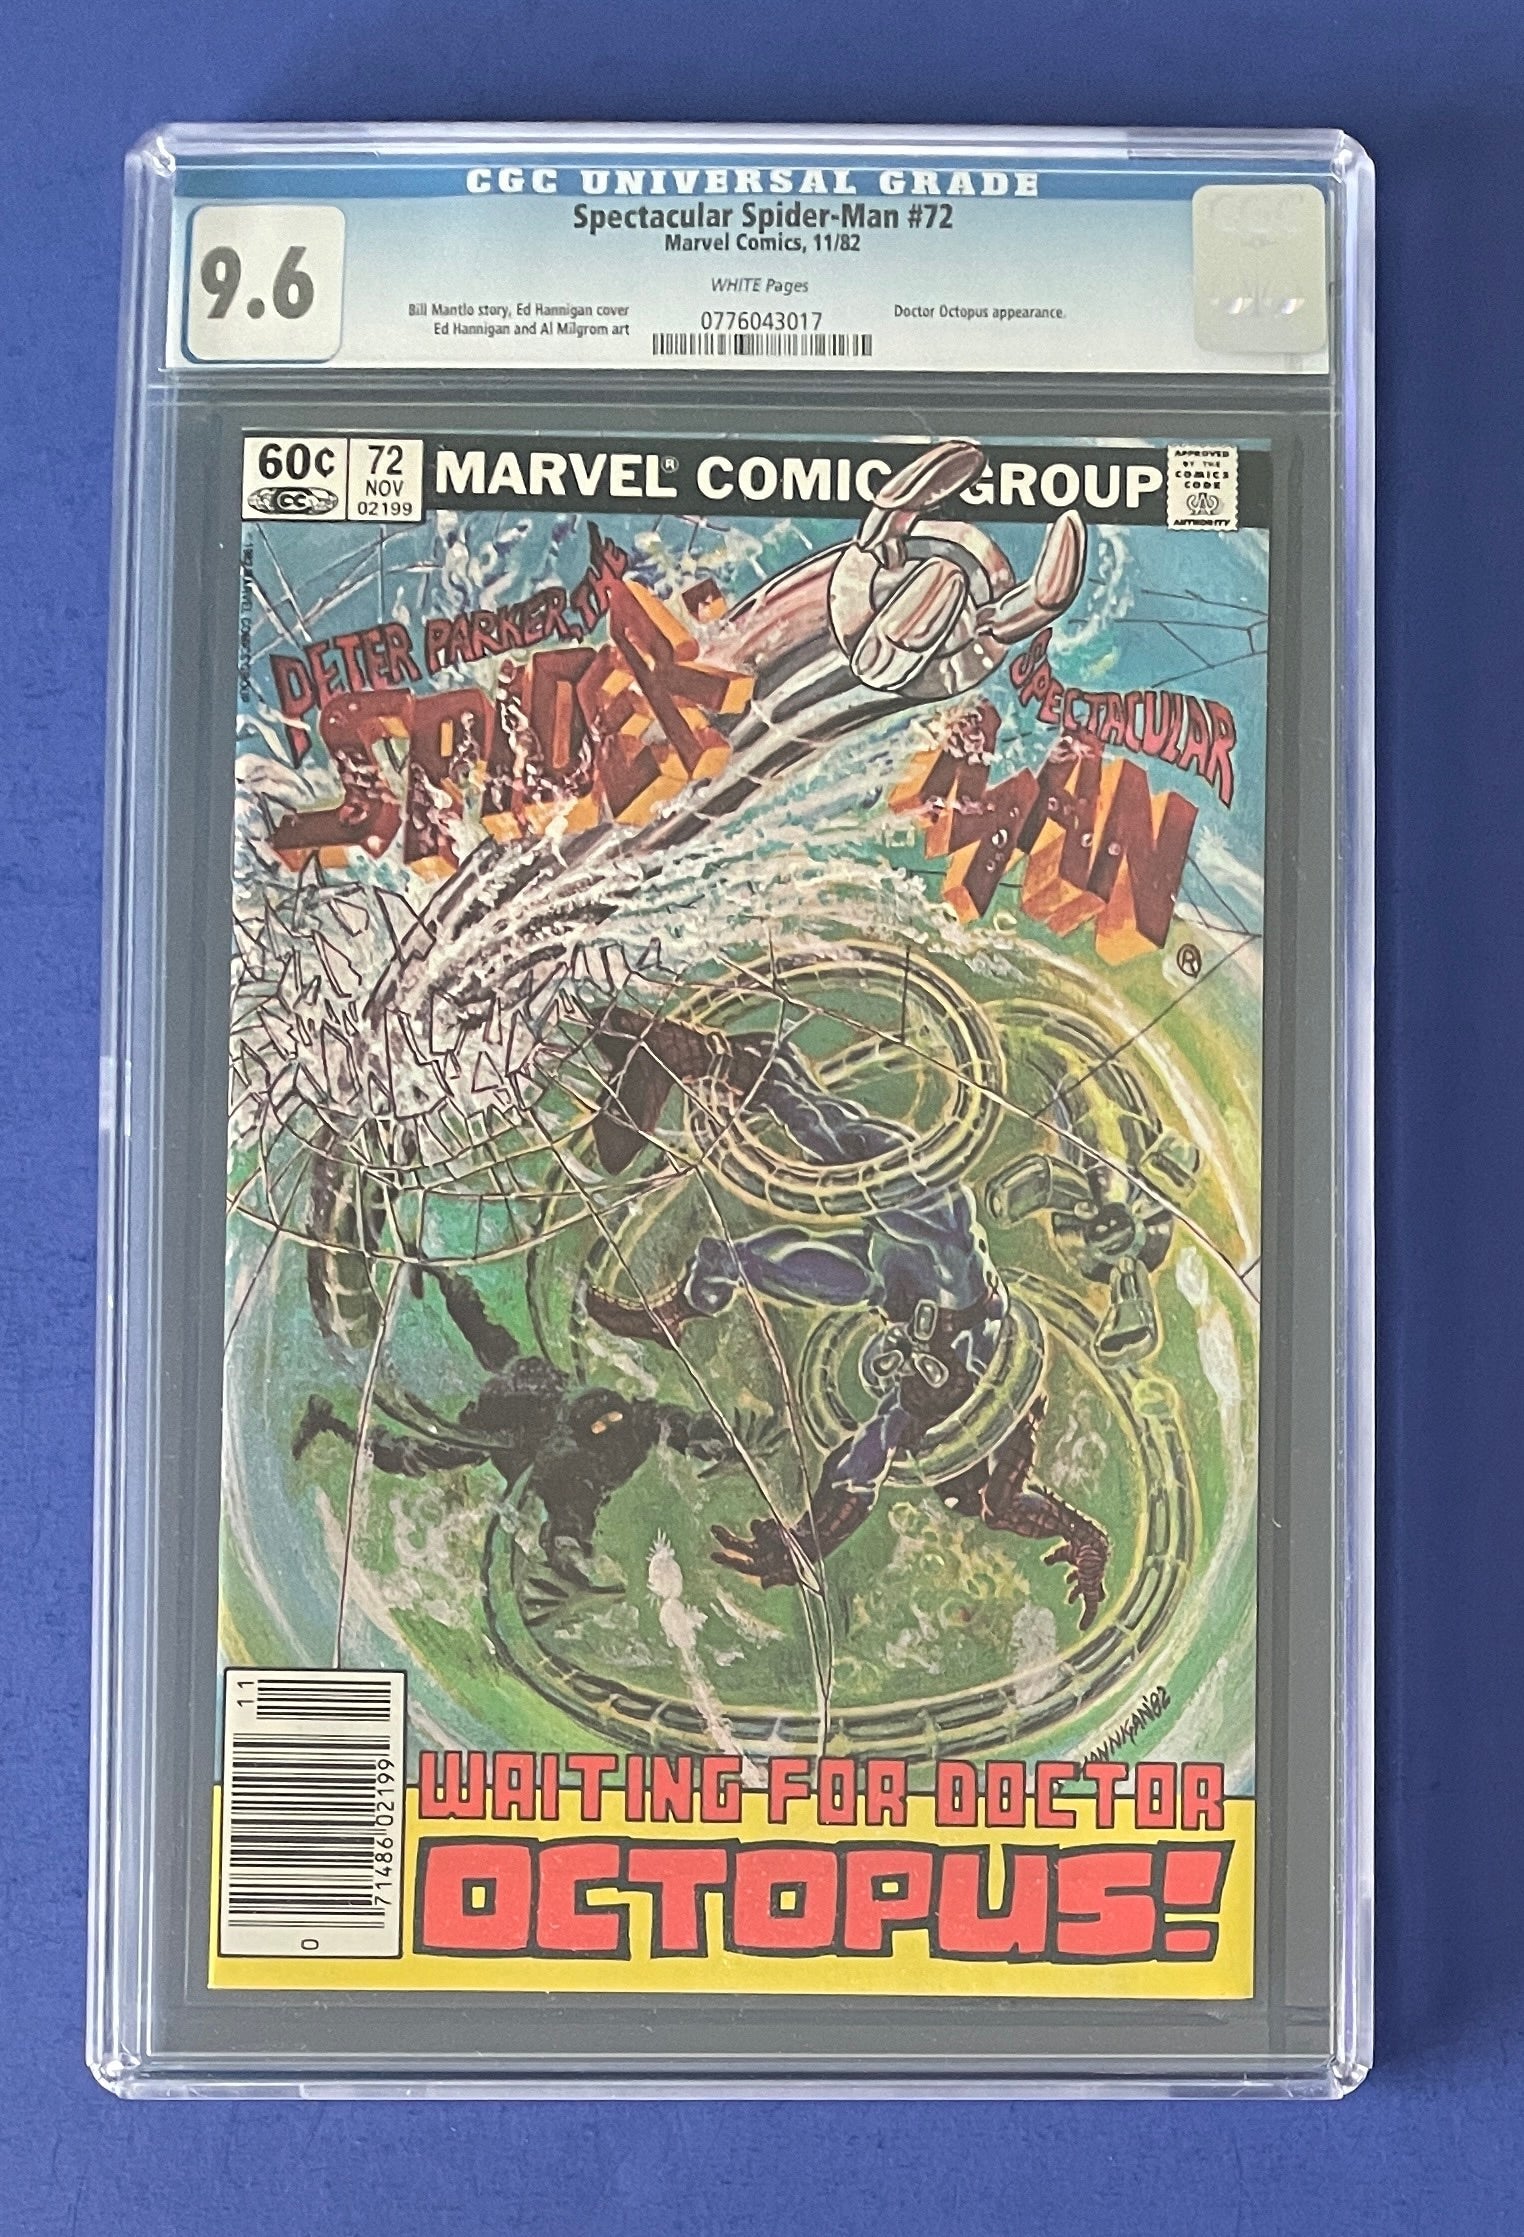 SPECTACULAR SPIDER-MAN #72 CGC 9.6 WP DOCTOR OCTOPUS APPEARANCE